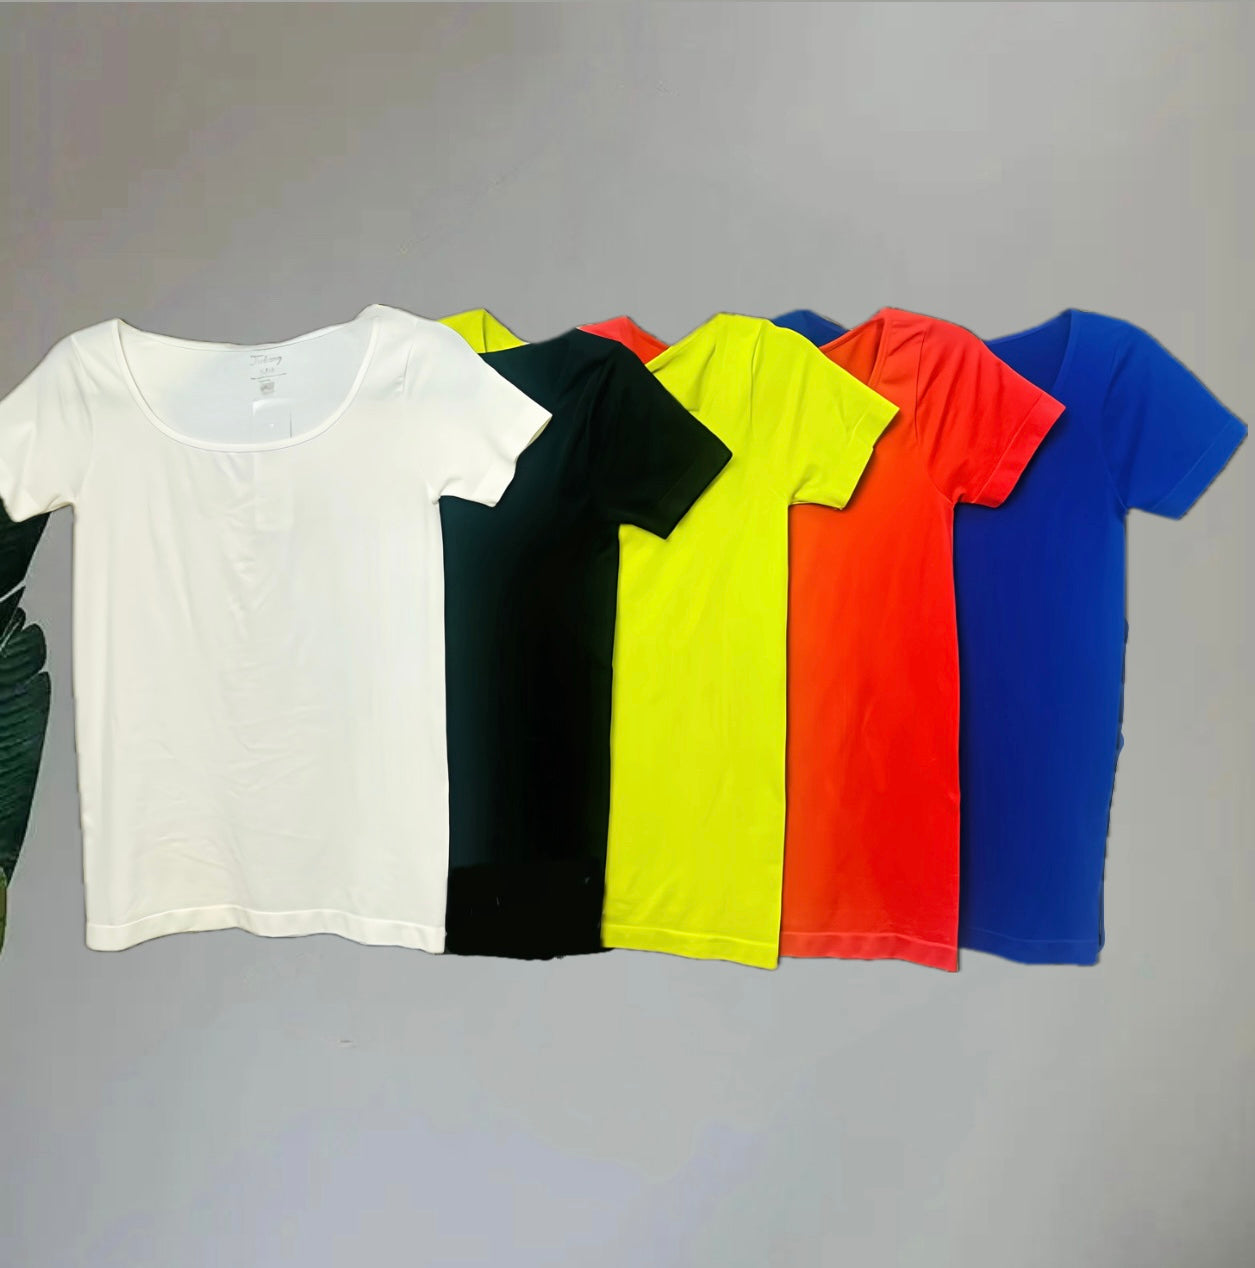 T6460TB Short Sleeve Cotton Seamless Top (2 Pack) at one pack price